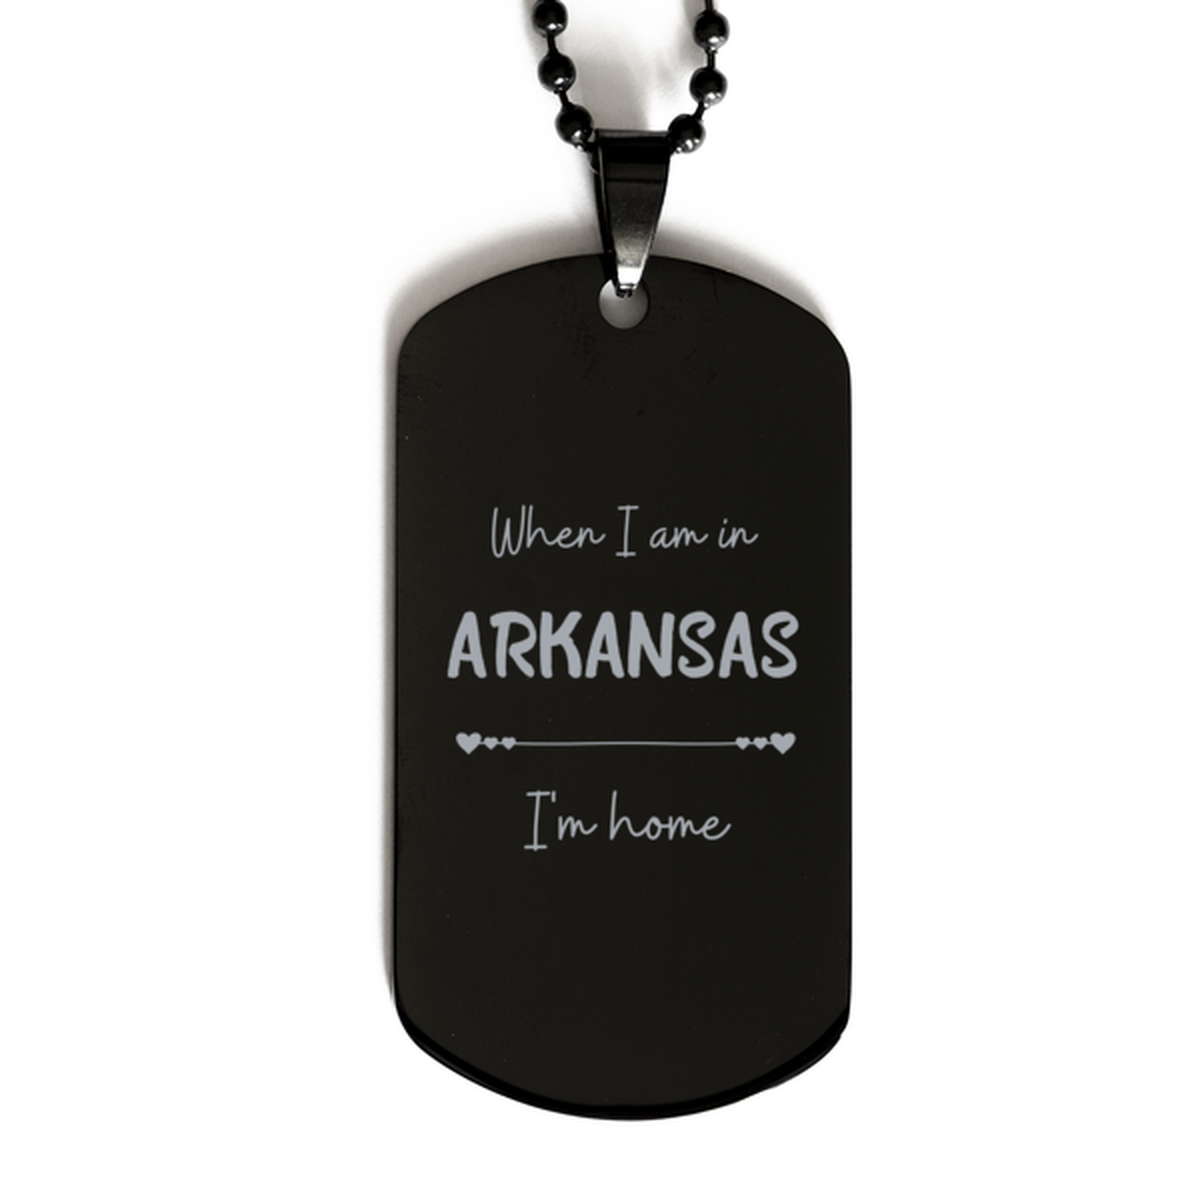 When I am in Arkansas I'm home Black Dog Tag, Cheap Gifts For Arkansas, State Arkansas Birthday Gifts for Friends Coworker